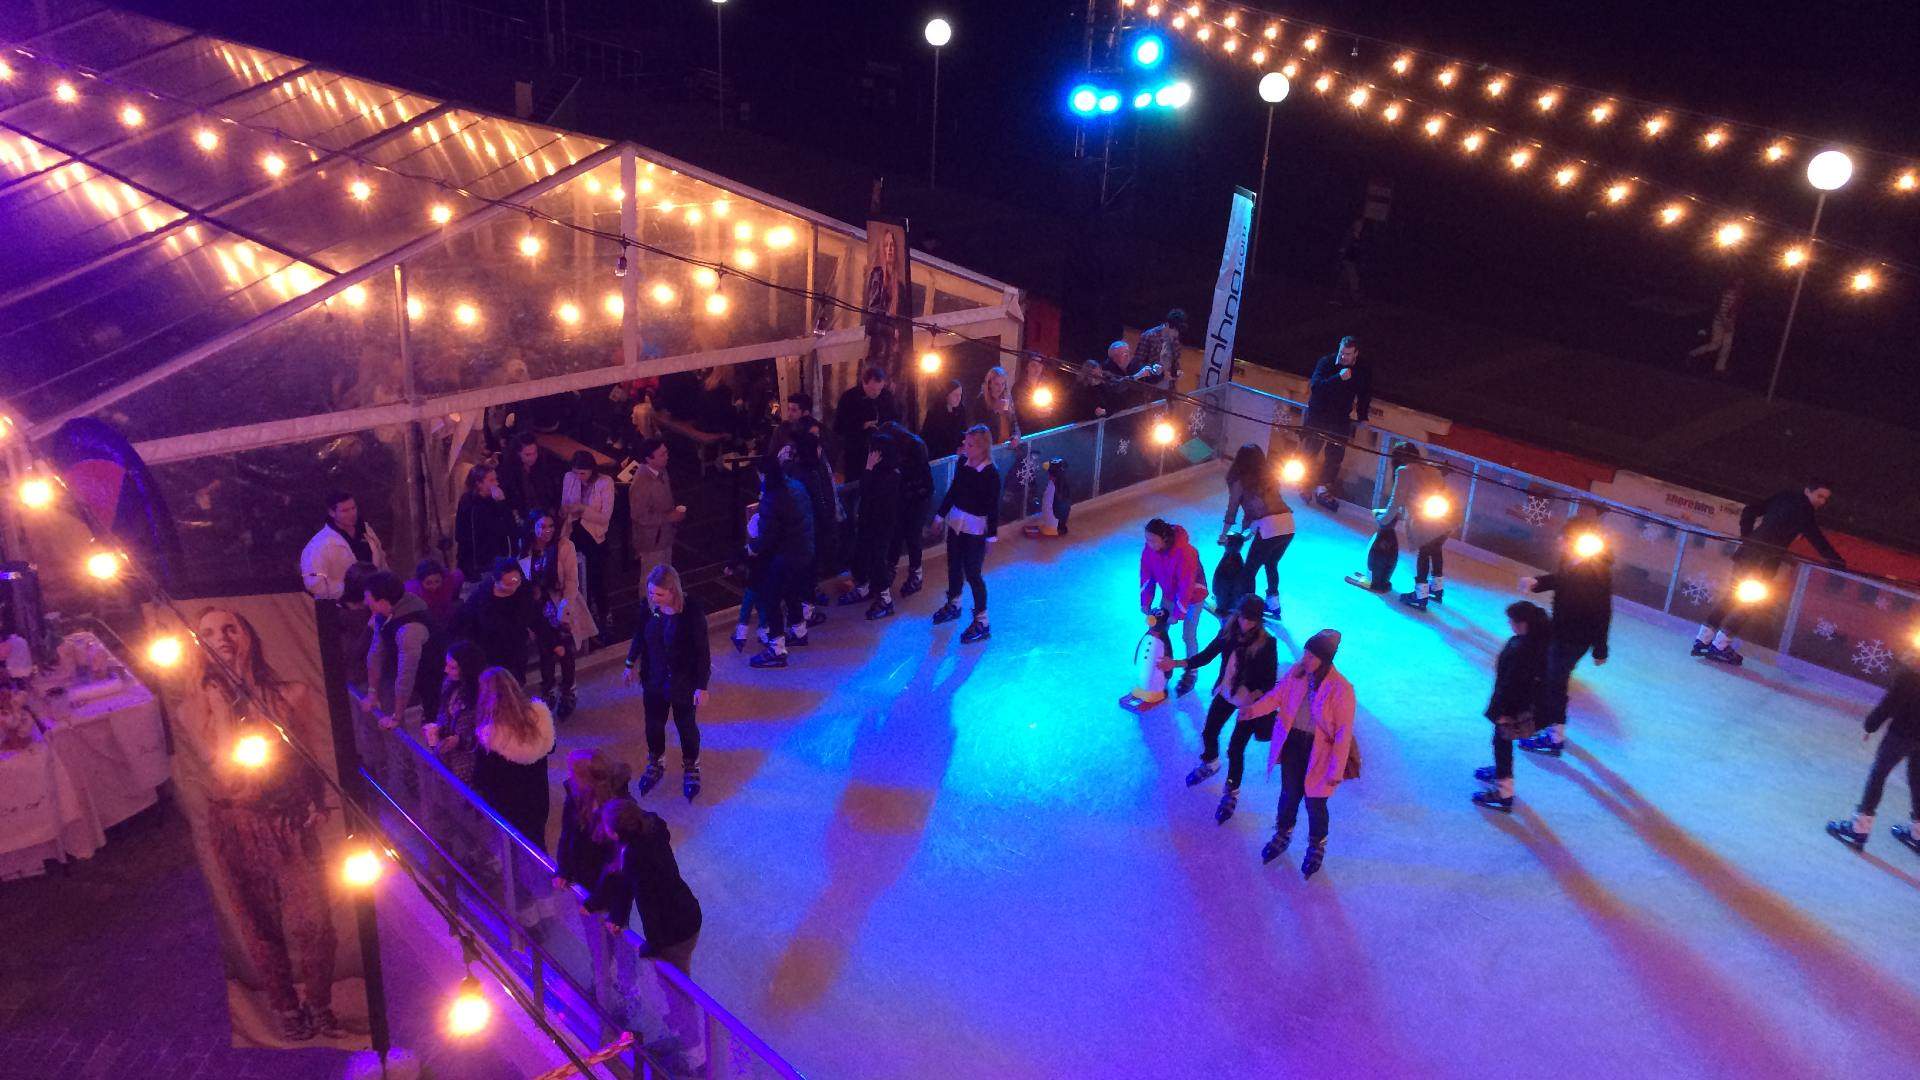 An Ice Rink Is Popping Up at Taronga Zoo So You Can See Adorable Animals, Then Skate